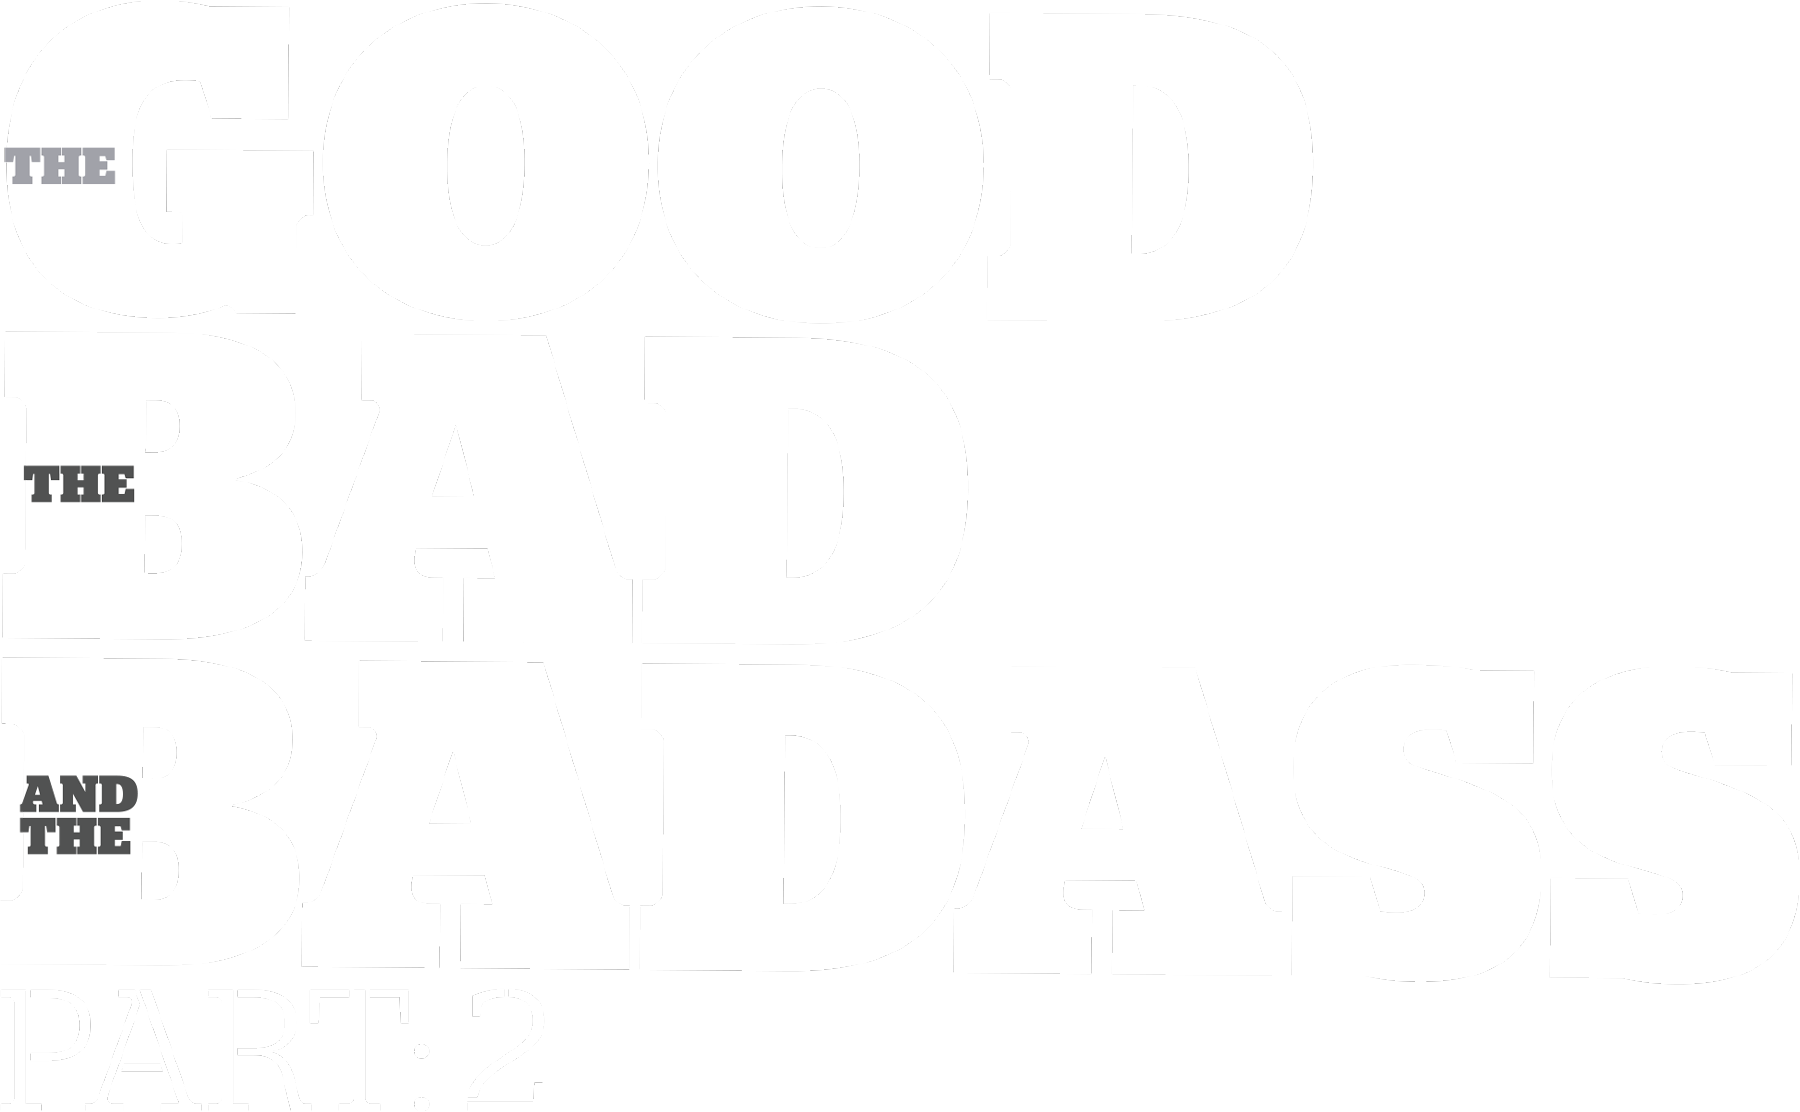 The Good, The Bad, The Badass: Part 2